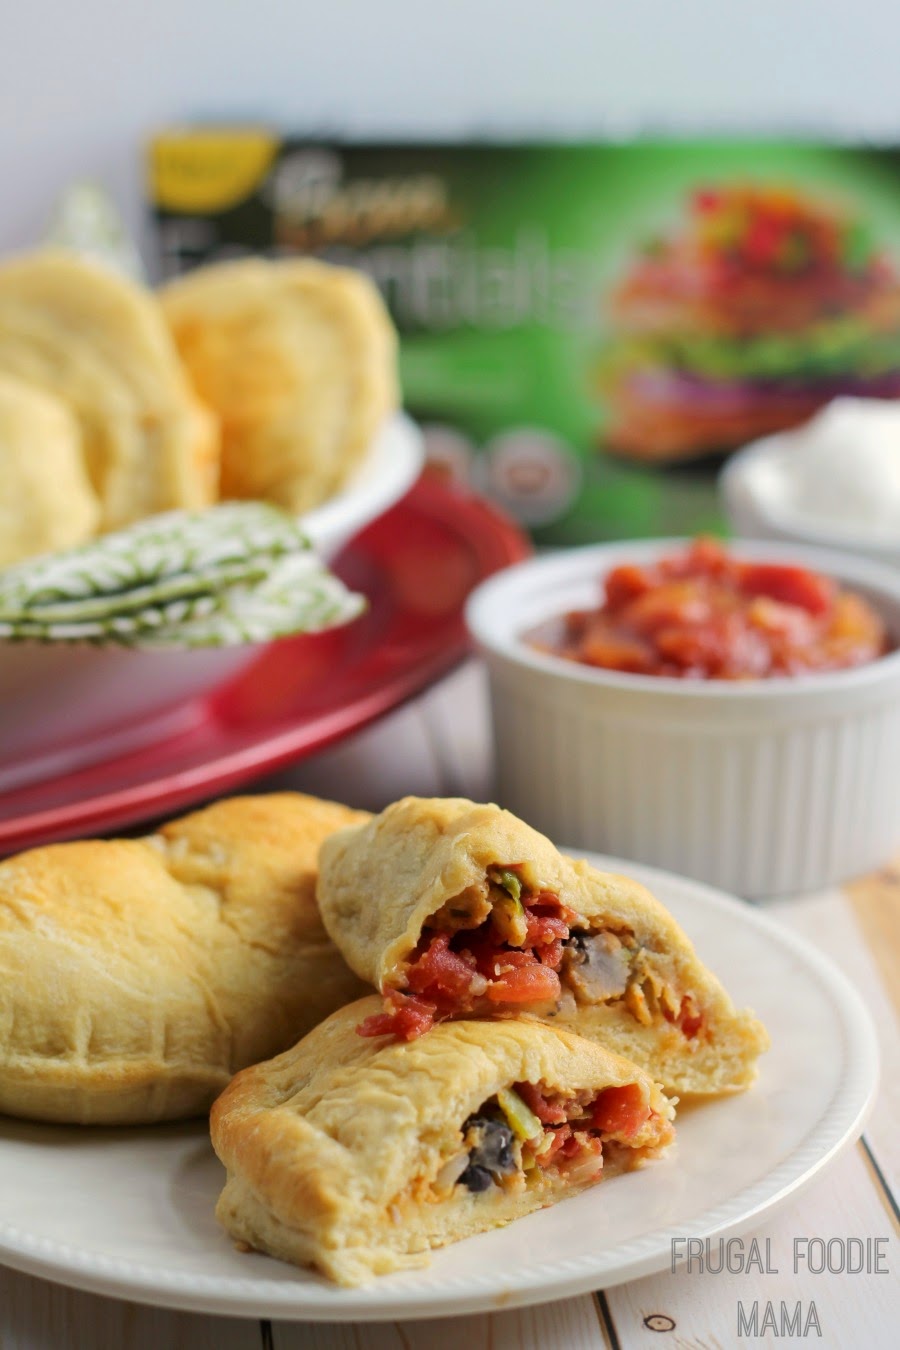 These Easy Chile Relleno Empanadas are filled with chiles, black beans, brown rice, cheese, & diced tomatoes and take just 4 ingredients & 30 minutes to make.